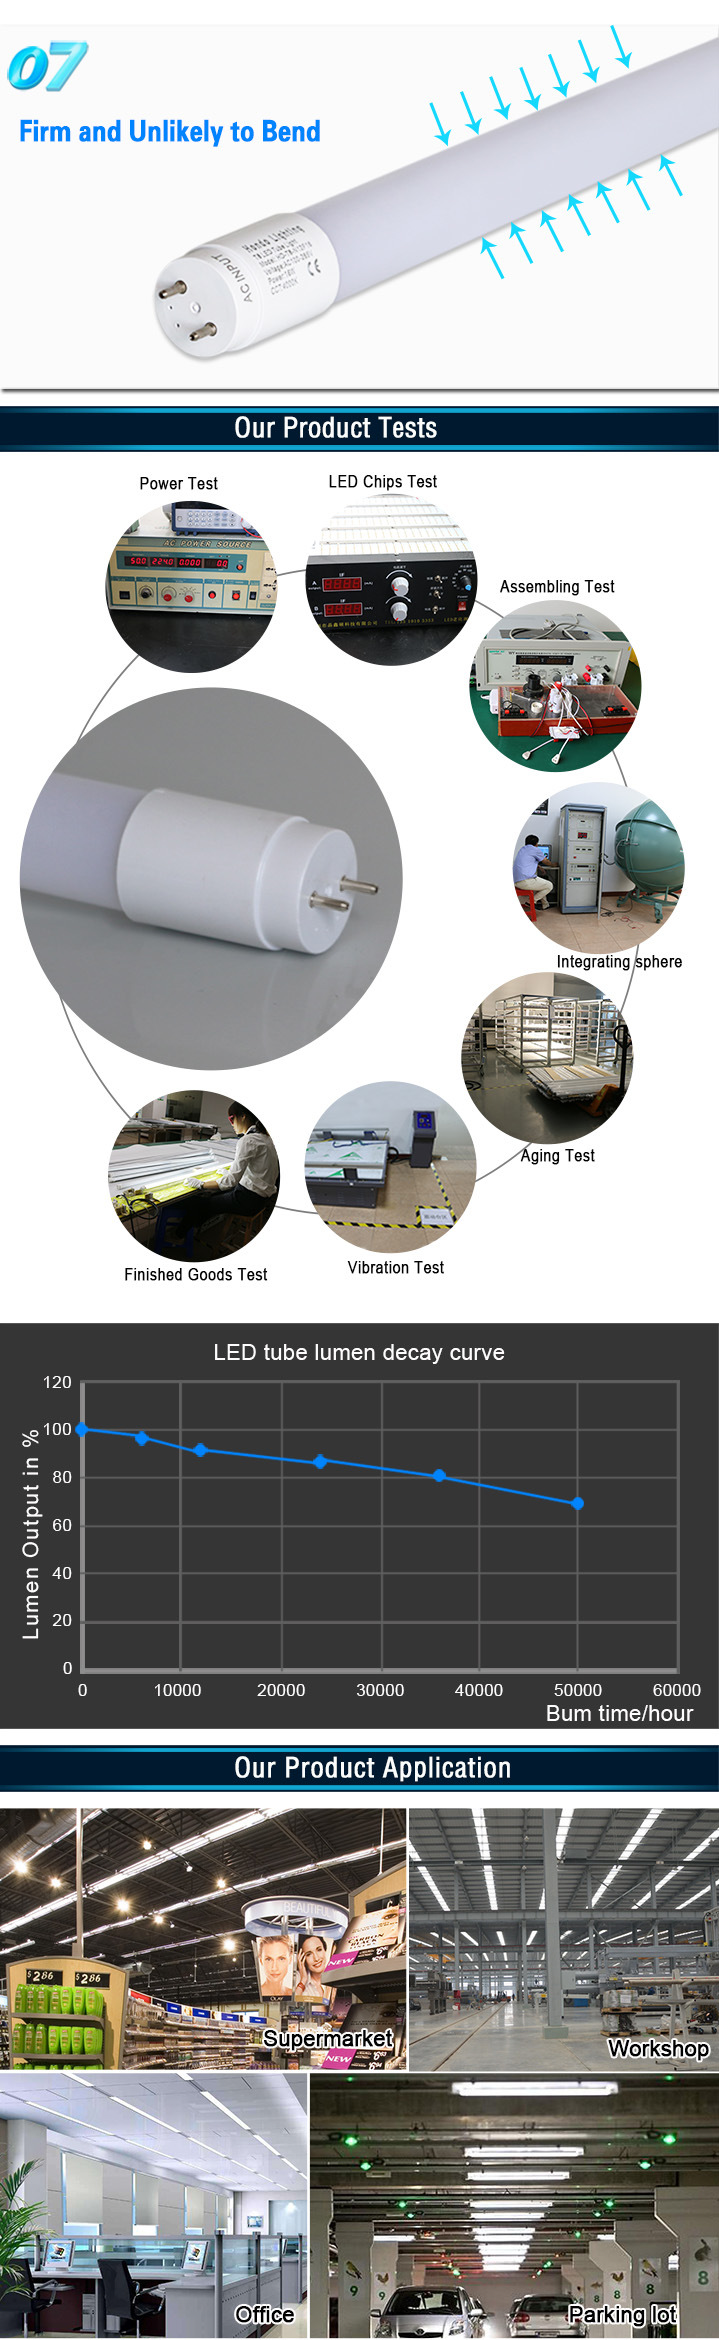 SMD2835 1200mm 150lm/W T8 LED Light Fluorescent Tube 18W for Parking